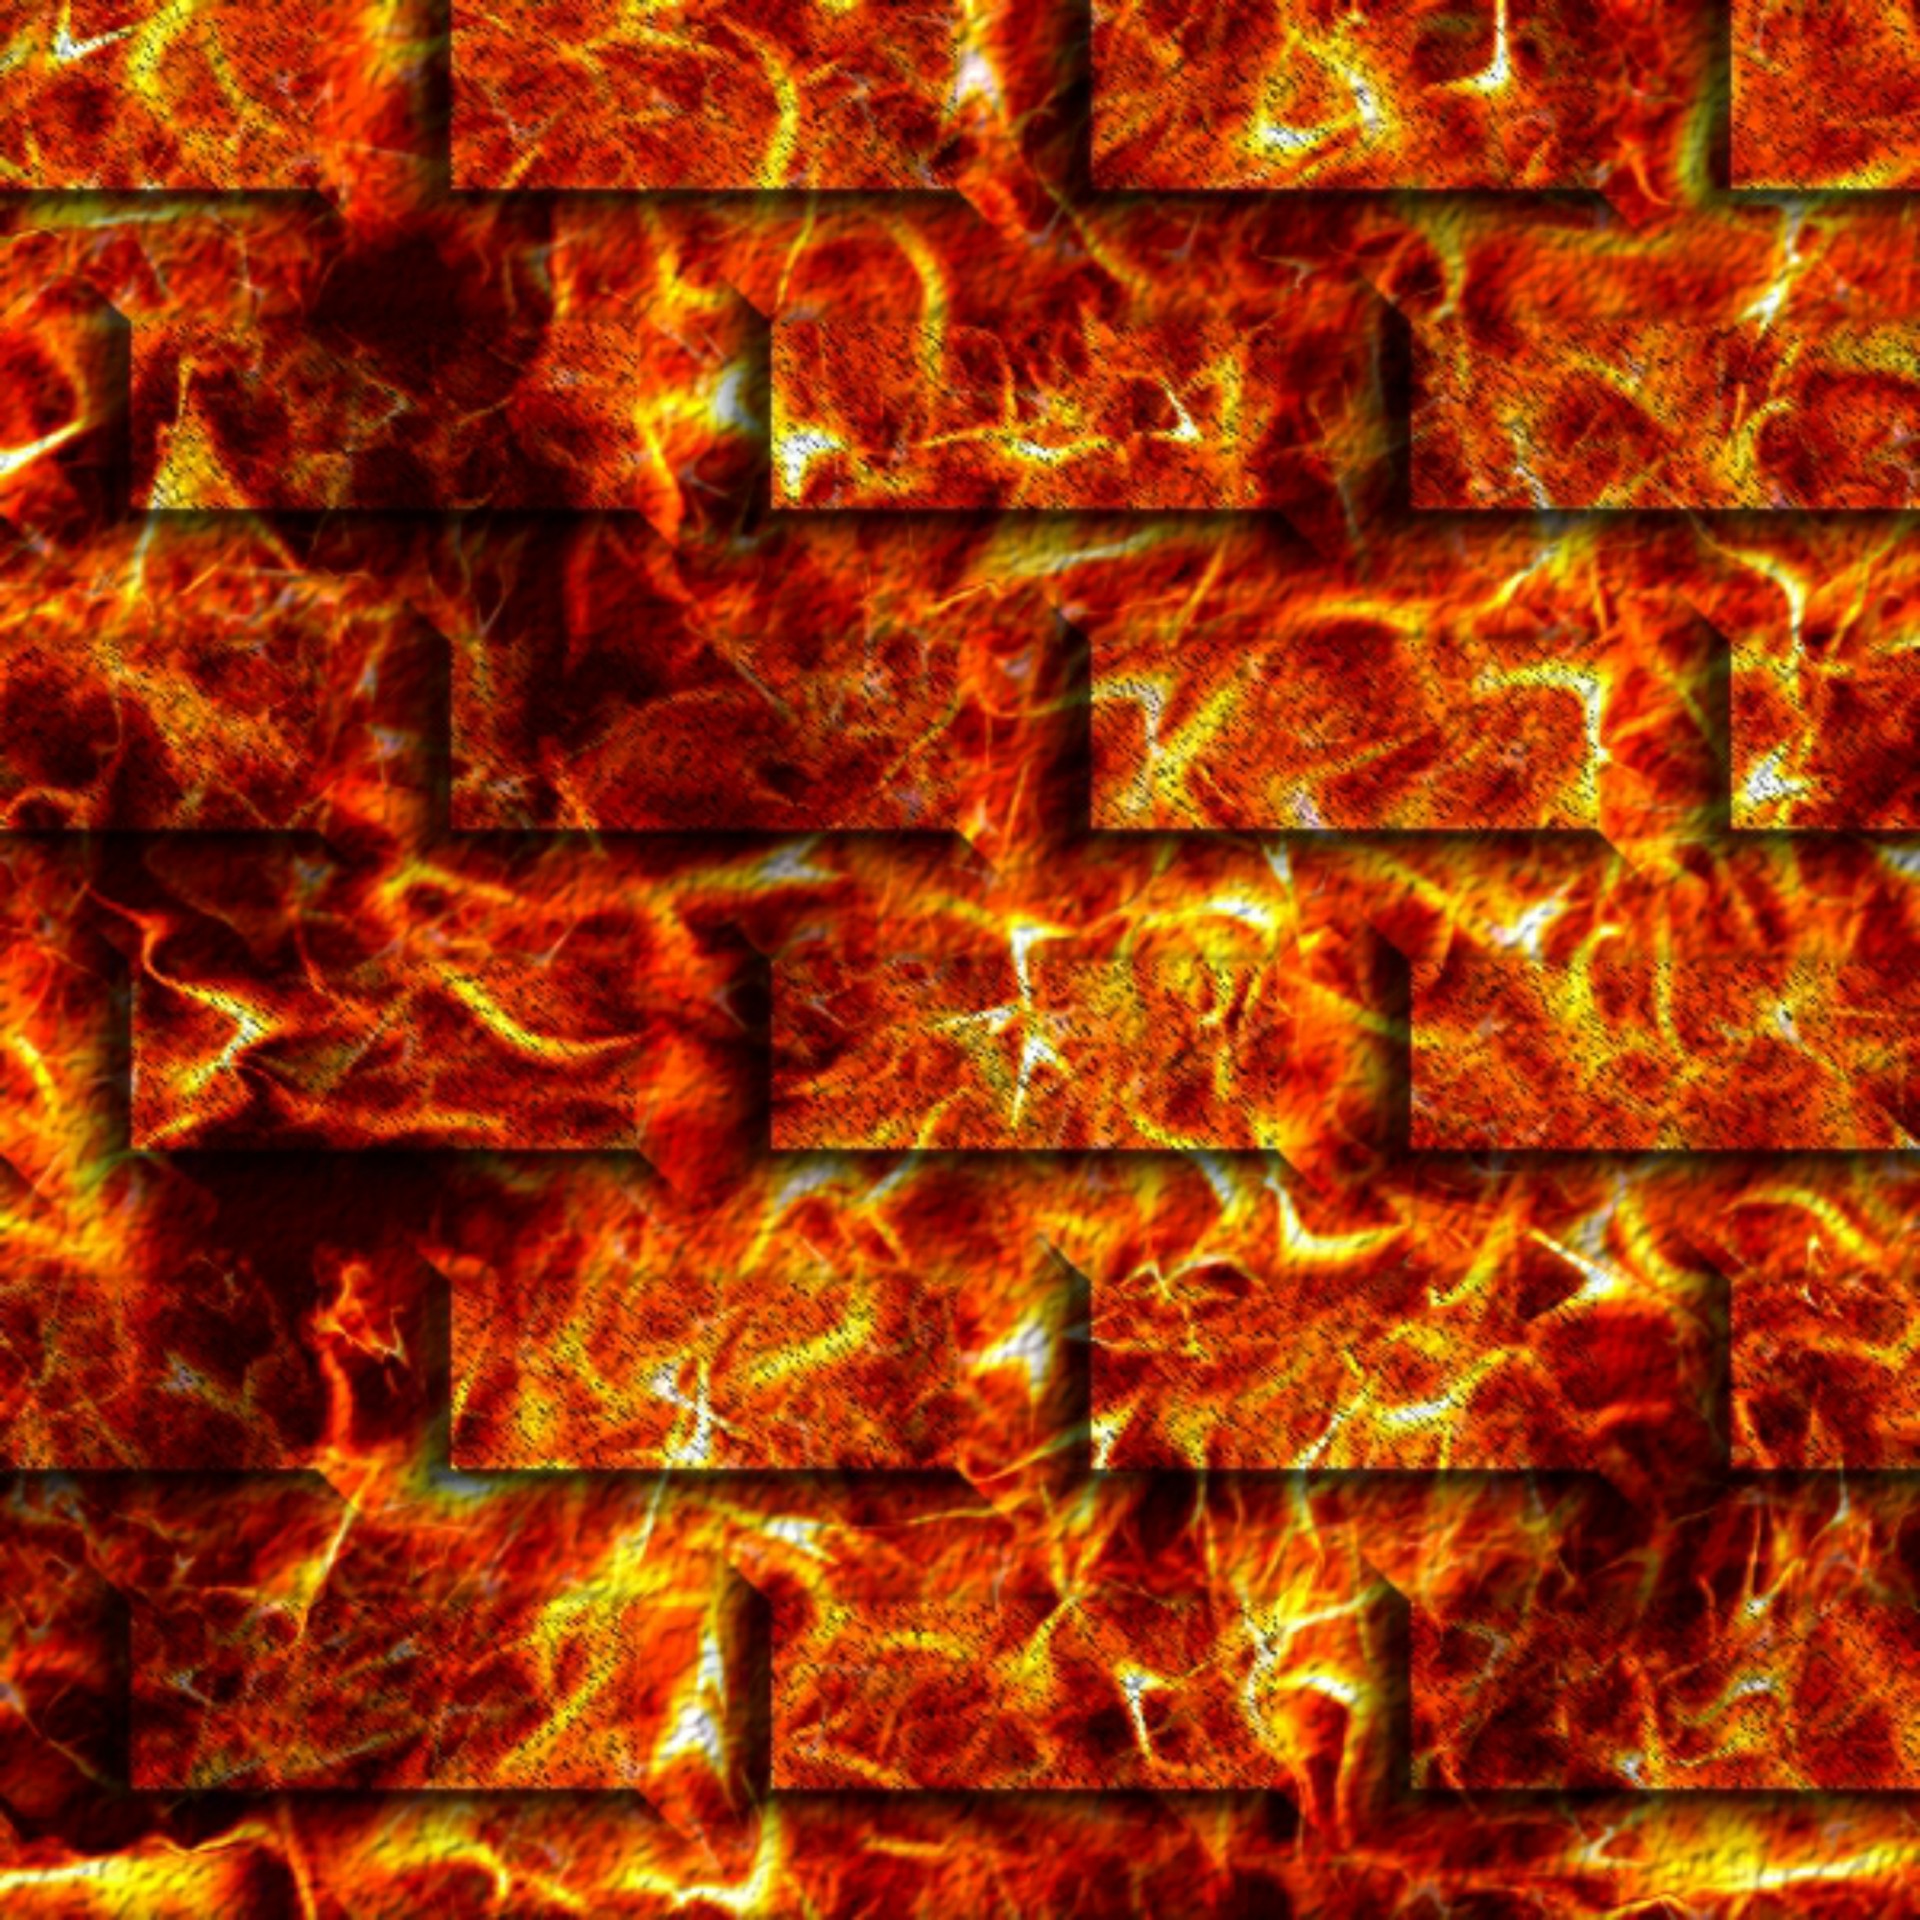 Bricks On Fire 2 Free Stock Photo - Public Domain Pictures